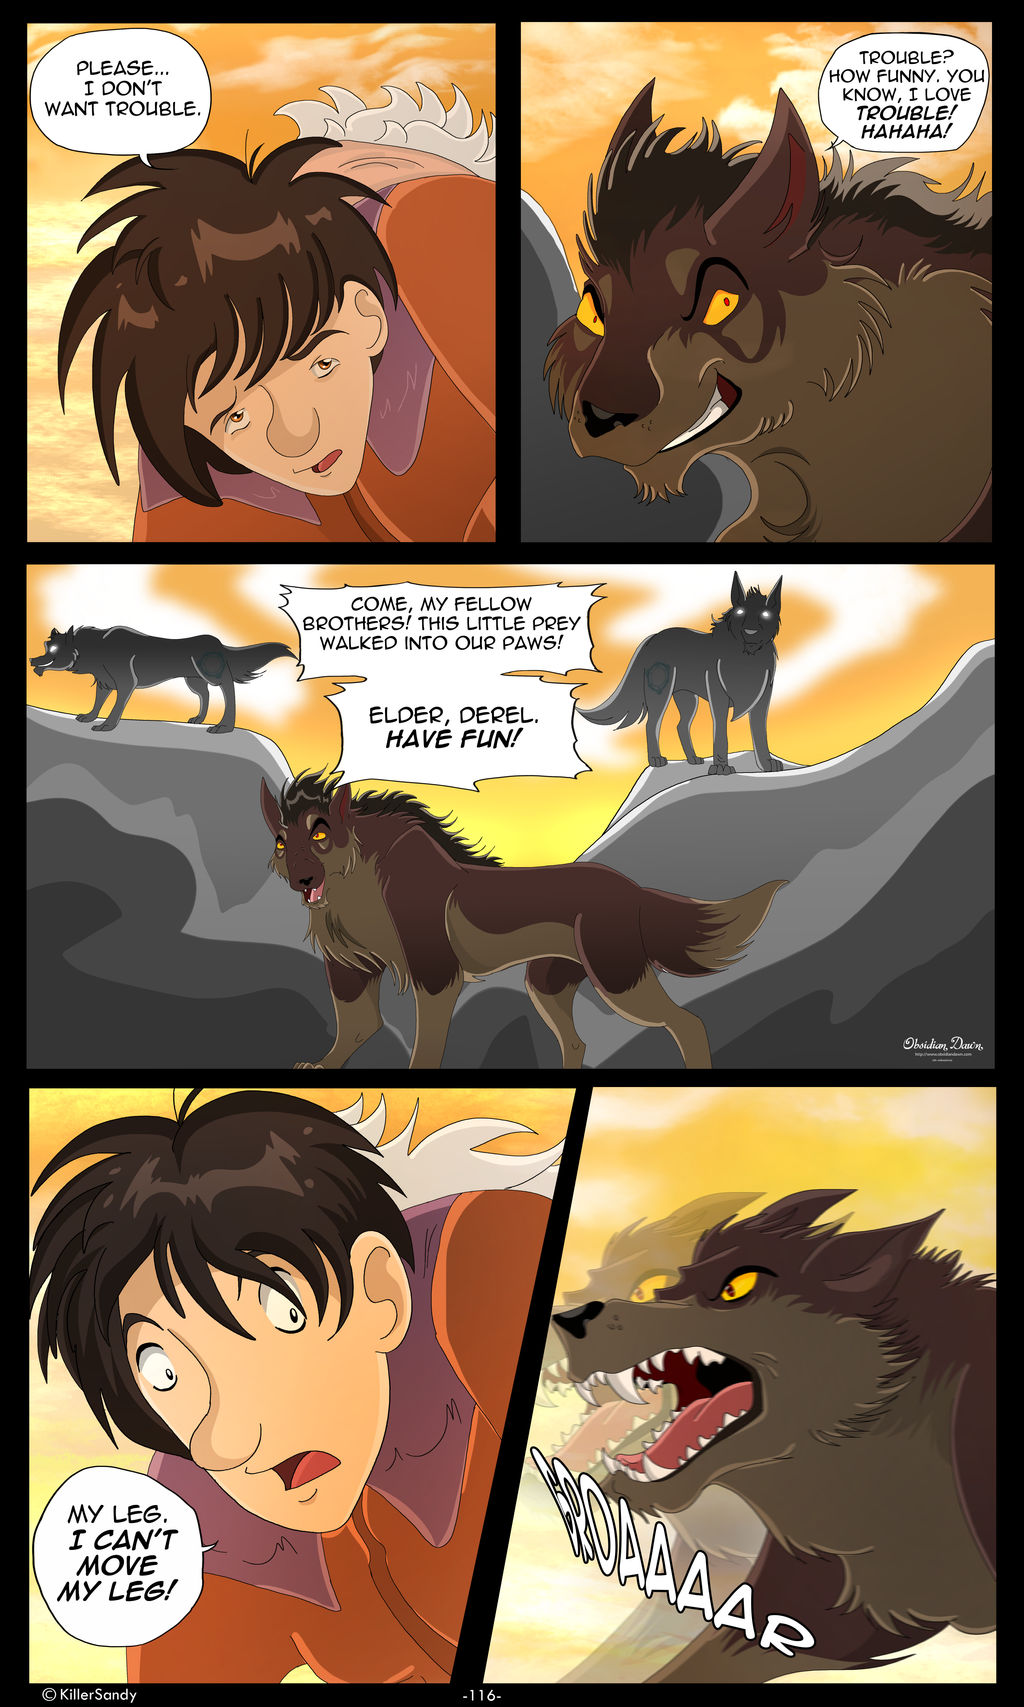 The Prince of the Moonlight Stone page 116